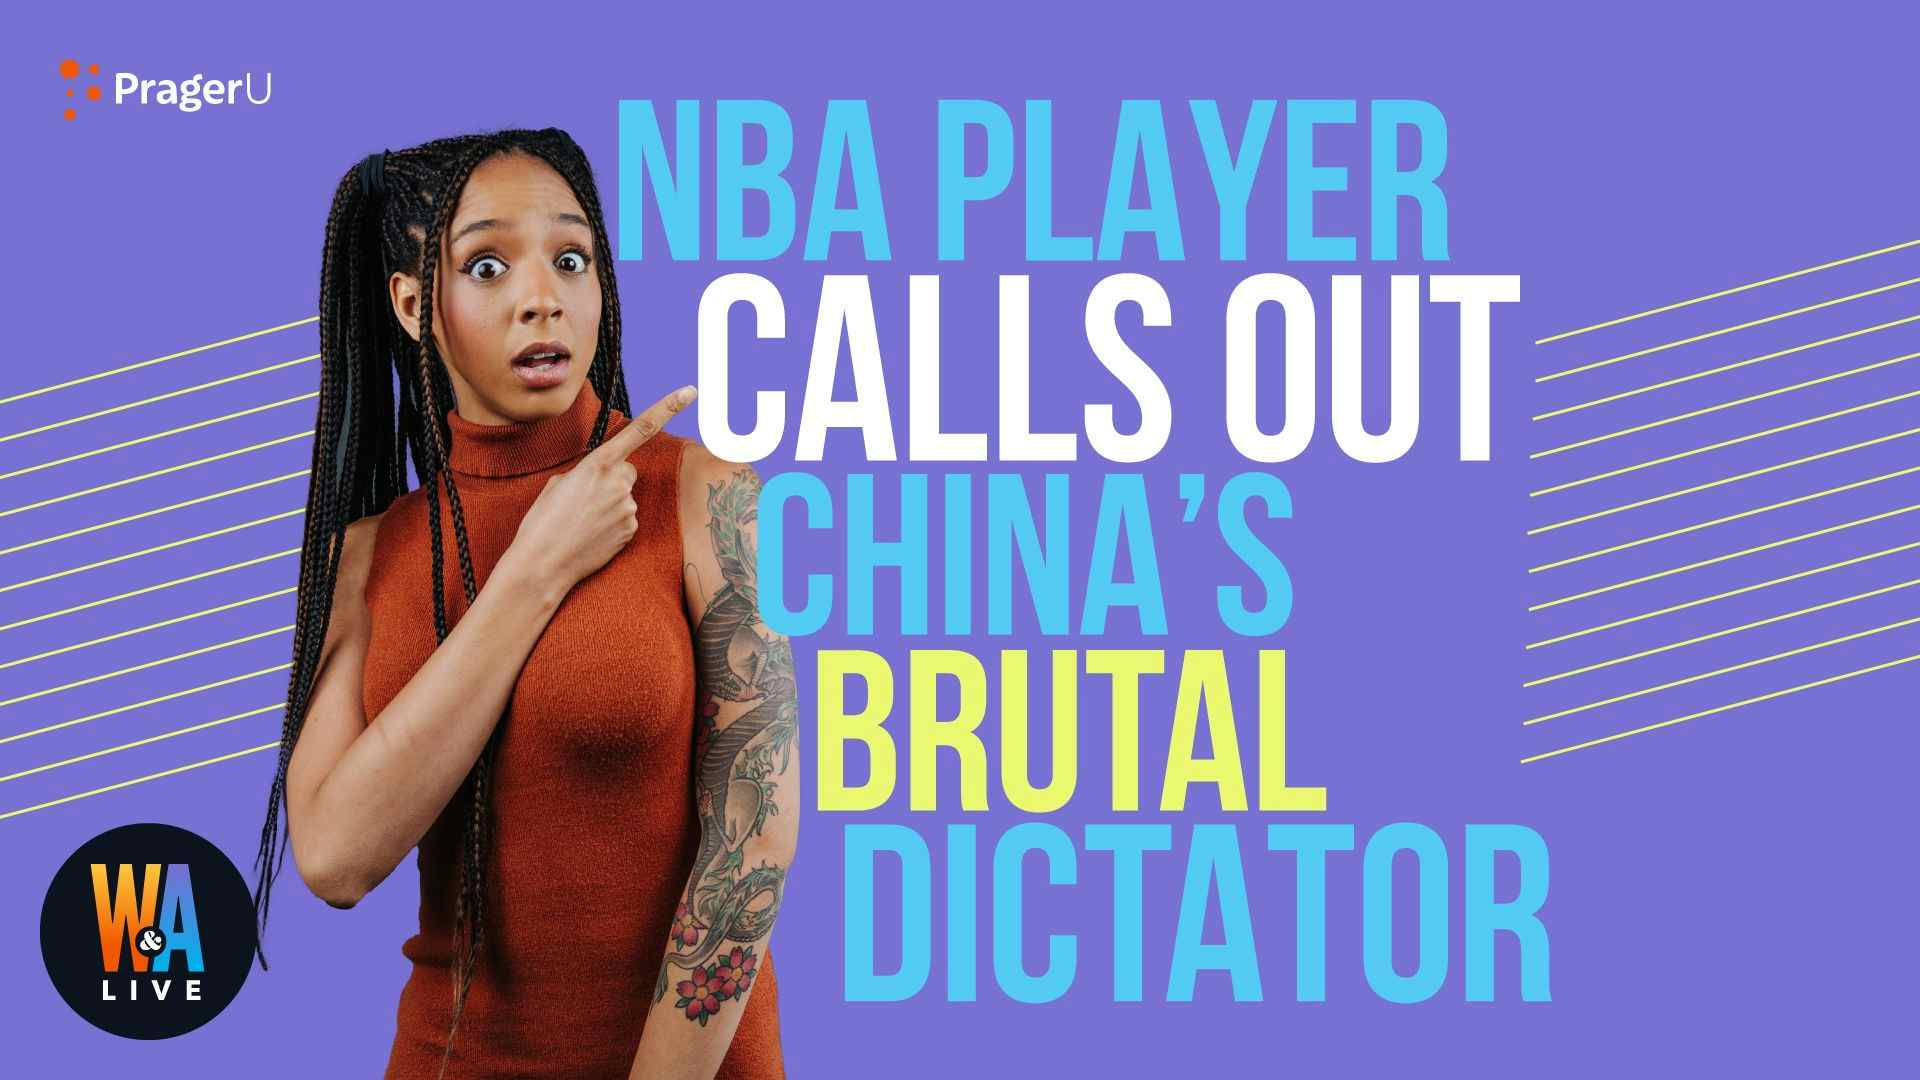 NBA Player Calls Out China’s “Brutal Dictator”: 10/22/2021